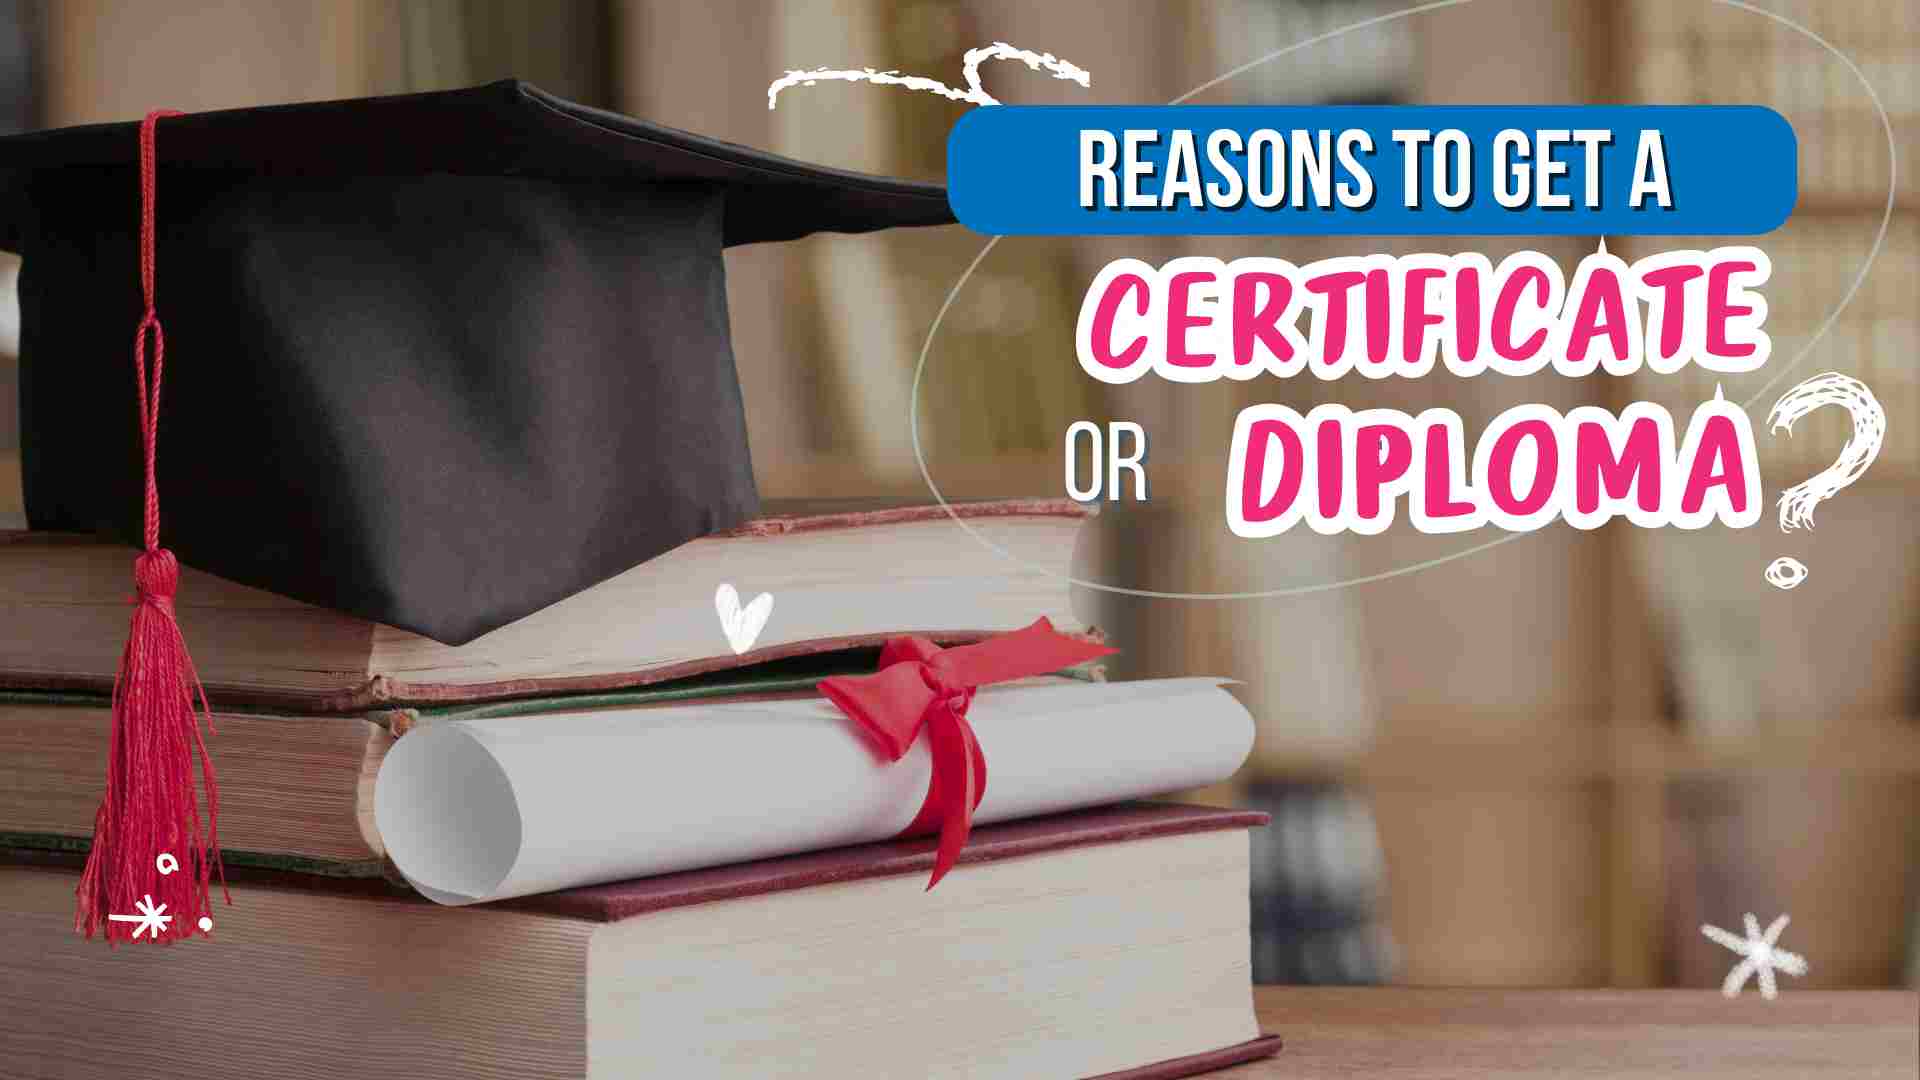 Reasons to get a certifiate or diploma